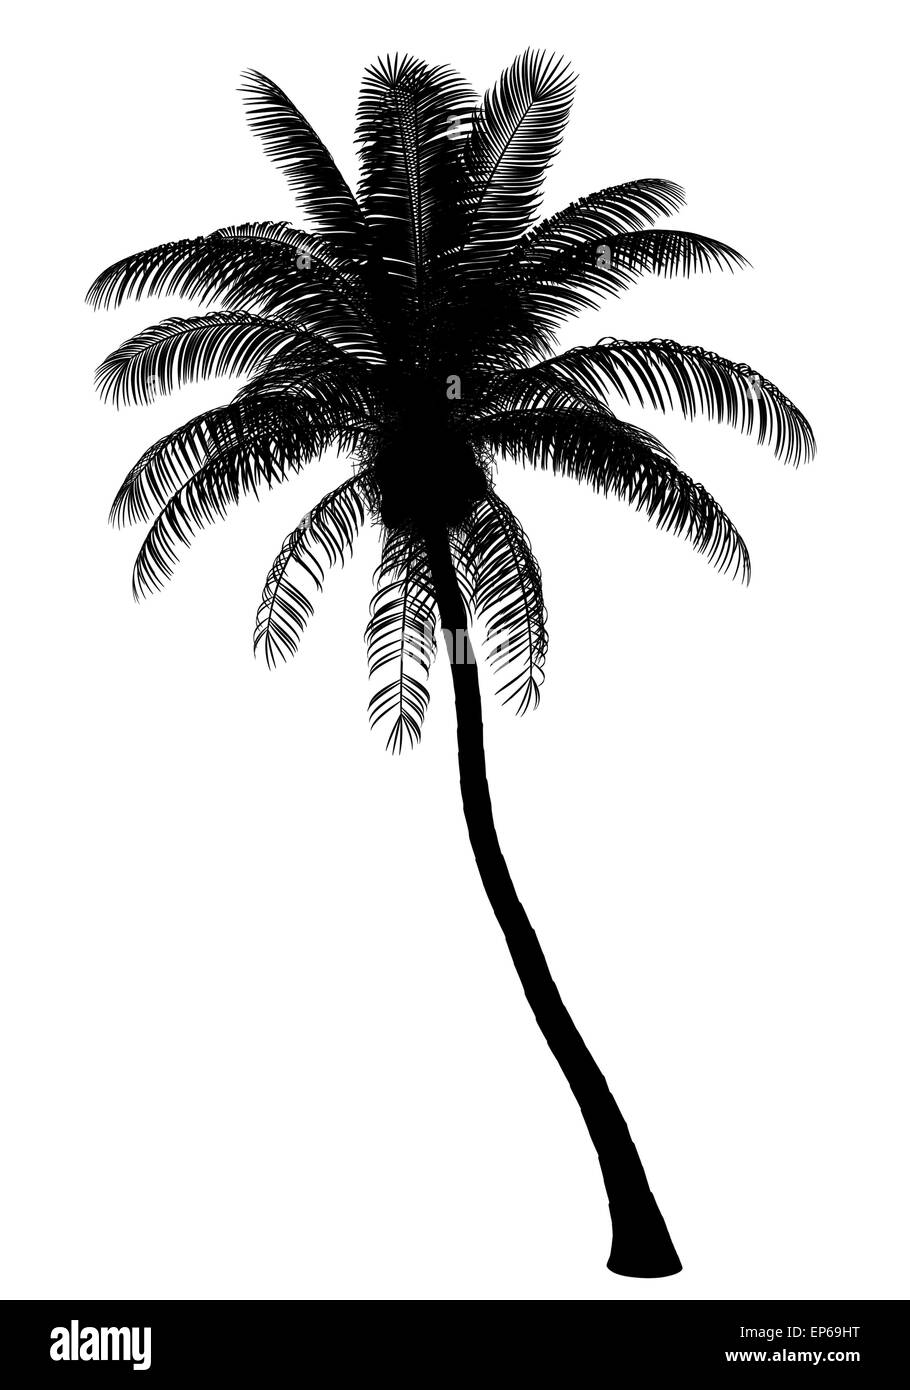 Silhouette Of Coconut Palm Tree Isolated On White Stock Photo Alamy